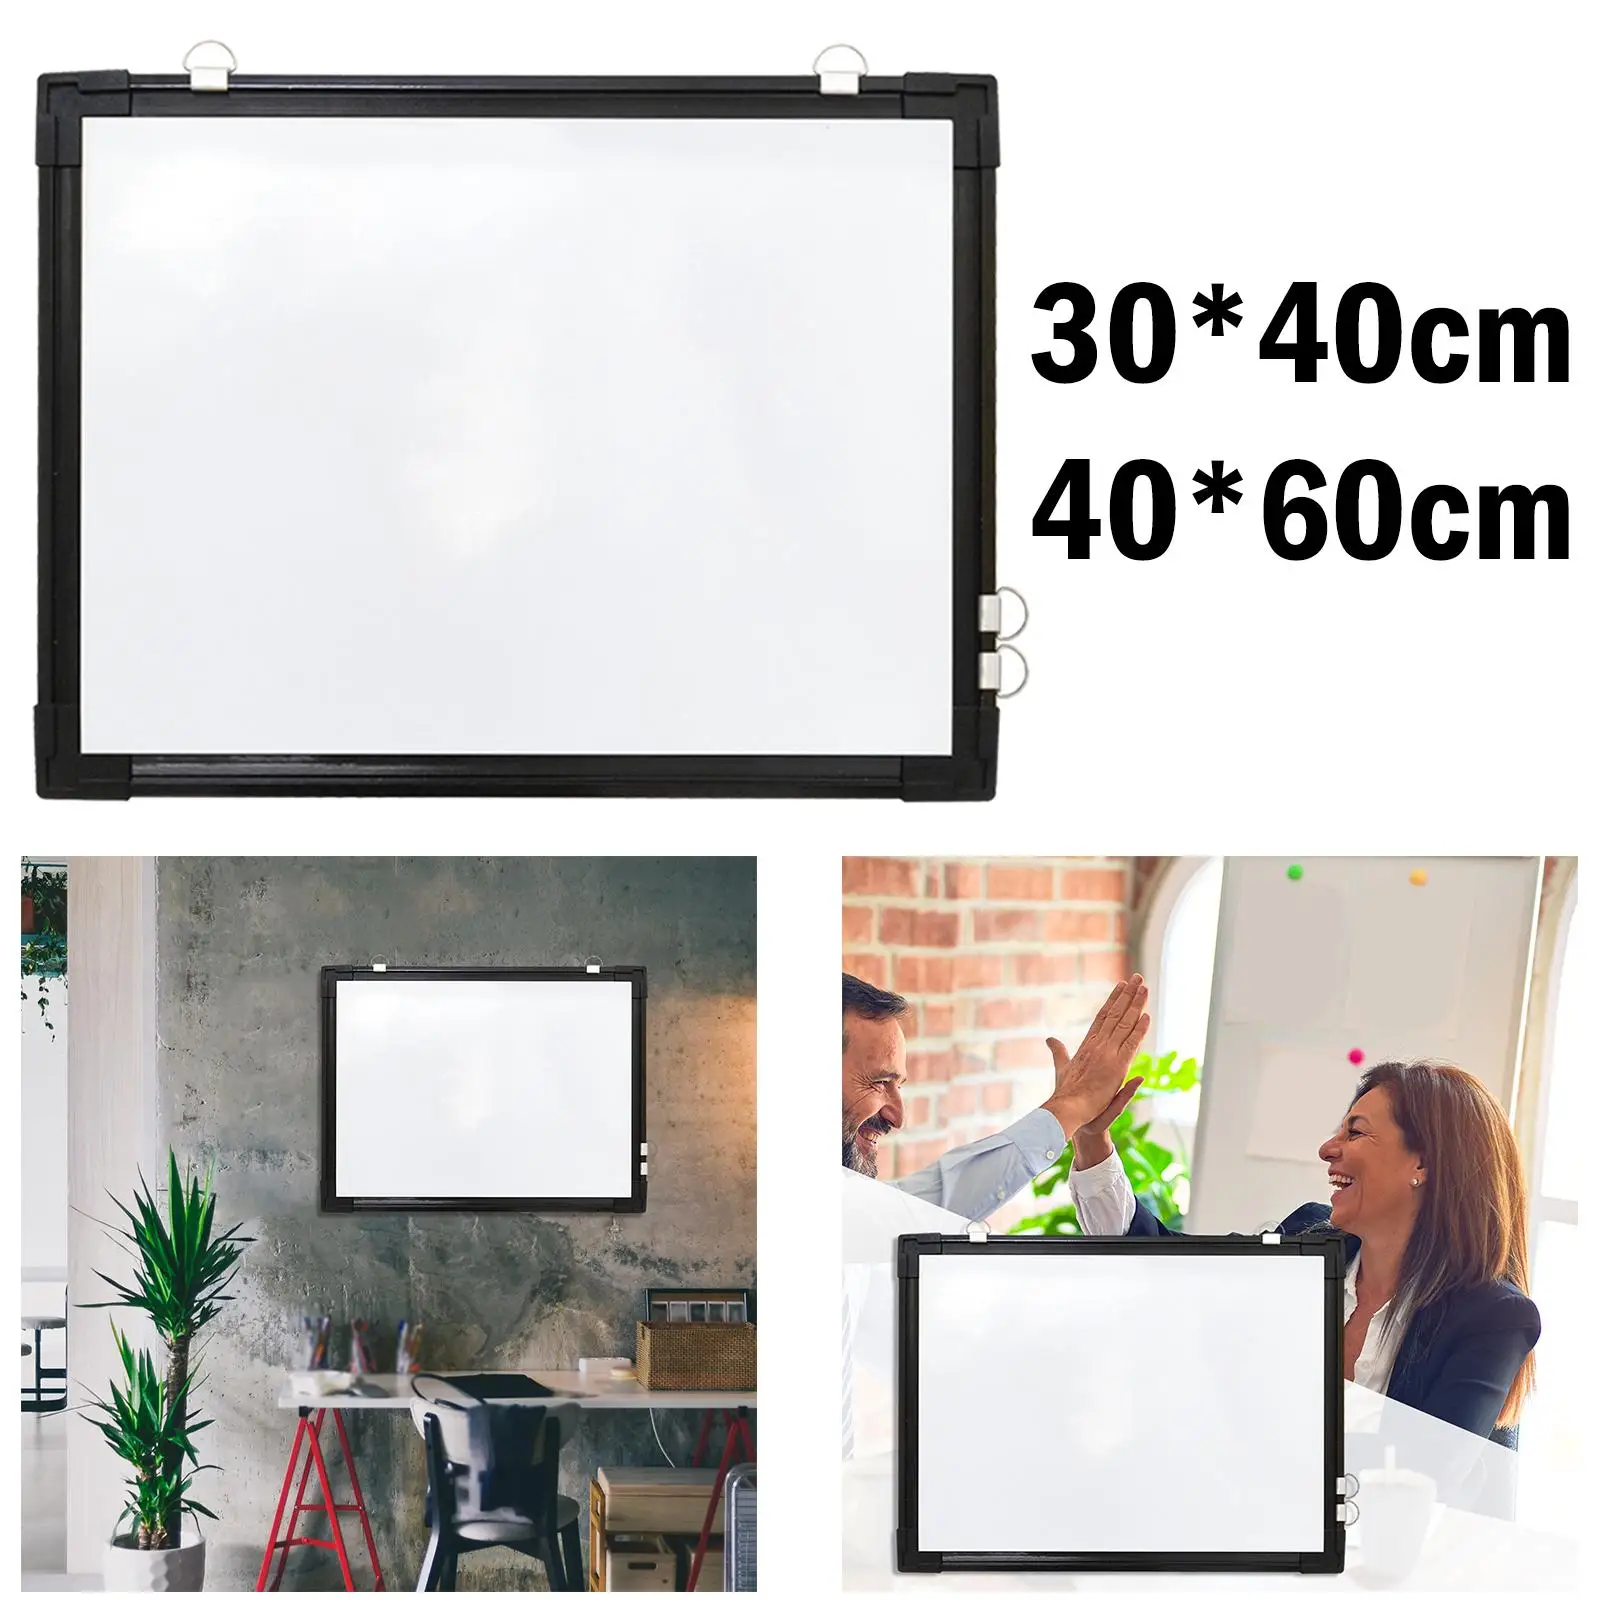 Portable Wall Hanging Whiteboard with r, Markers ,Double Sided Dry White Boards for Door Teaching List